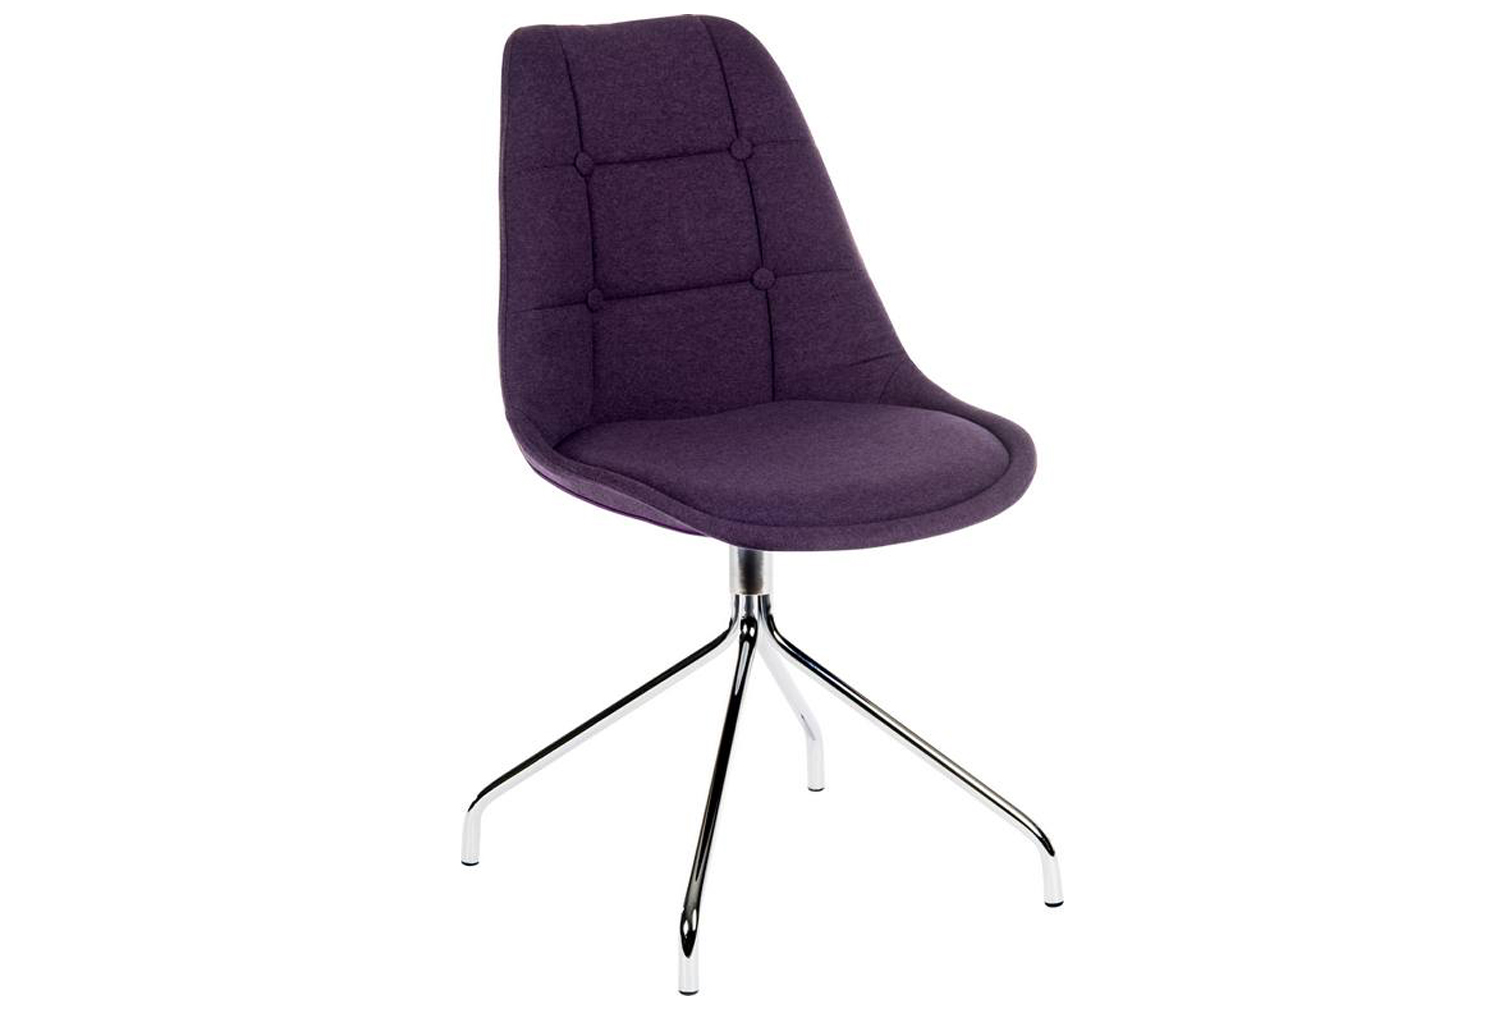 Pack Of 2 Foggia Breakout Chairs, Plum, Fully Installed